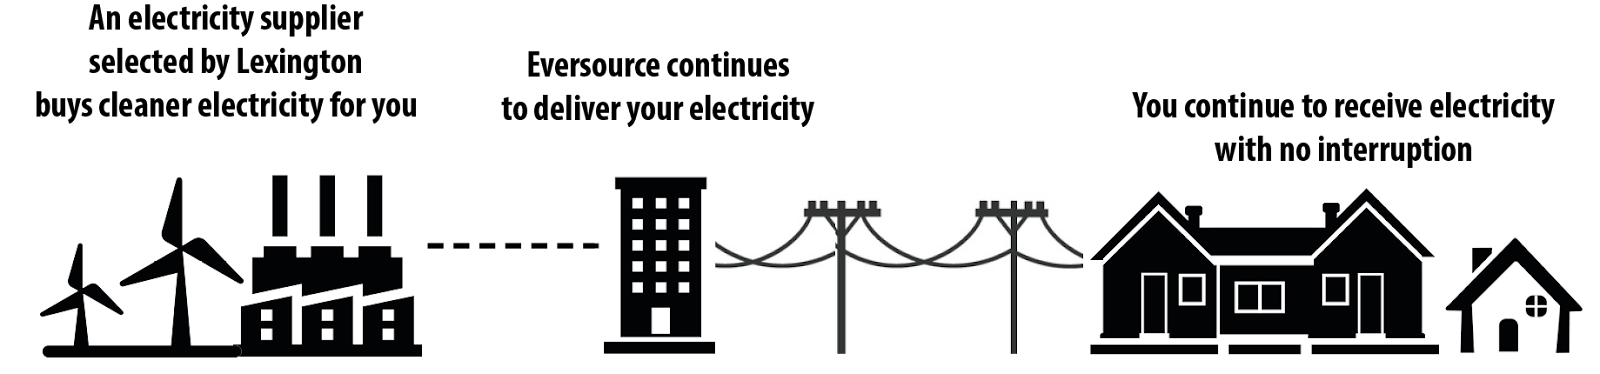 Diagram showing an electricity supplier, Eversource, and the town of Lexington